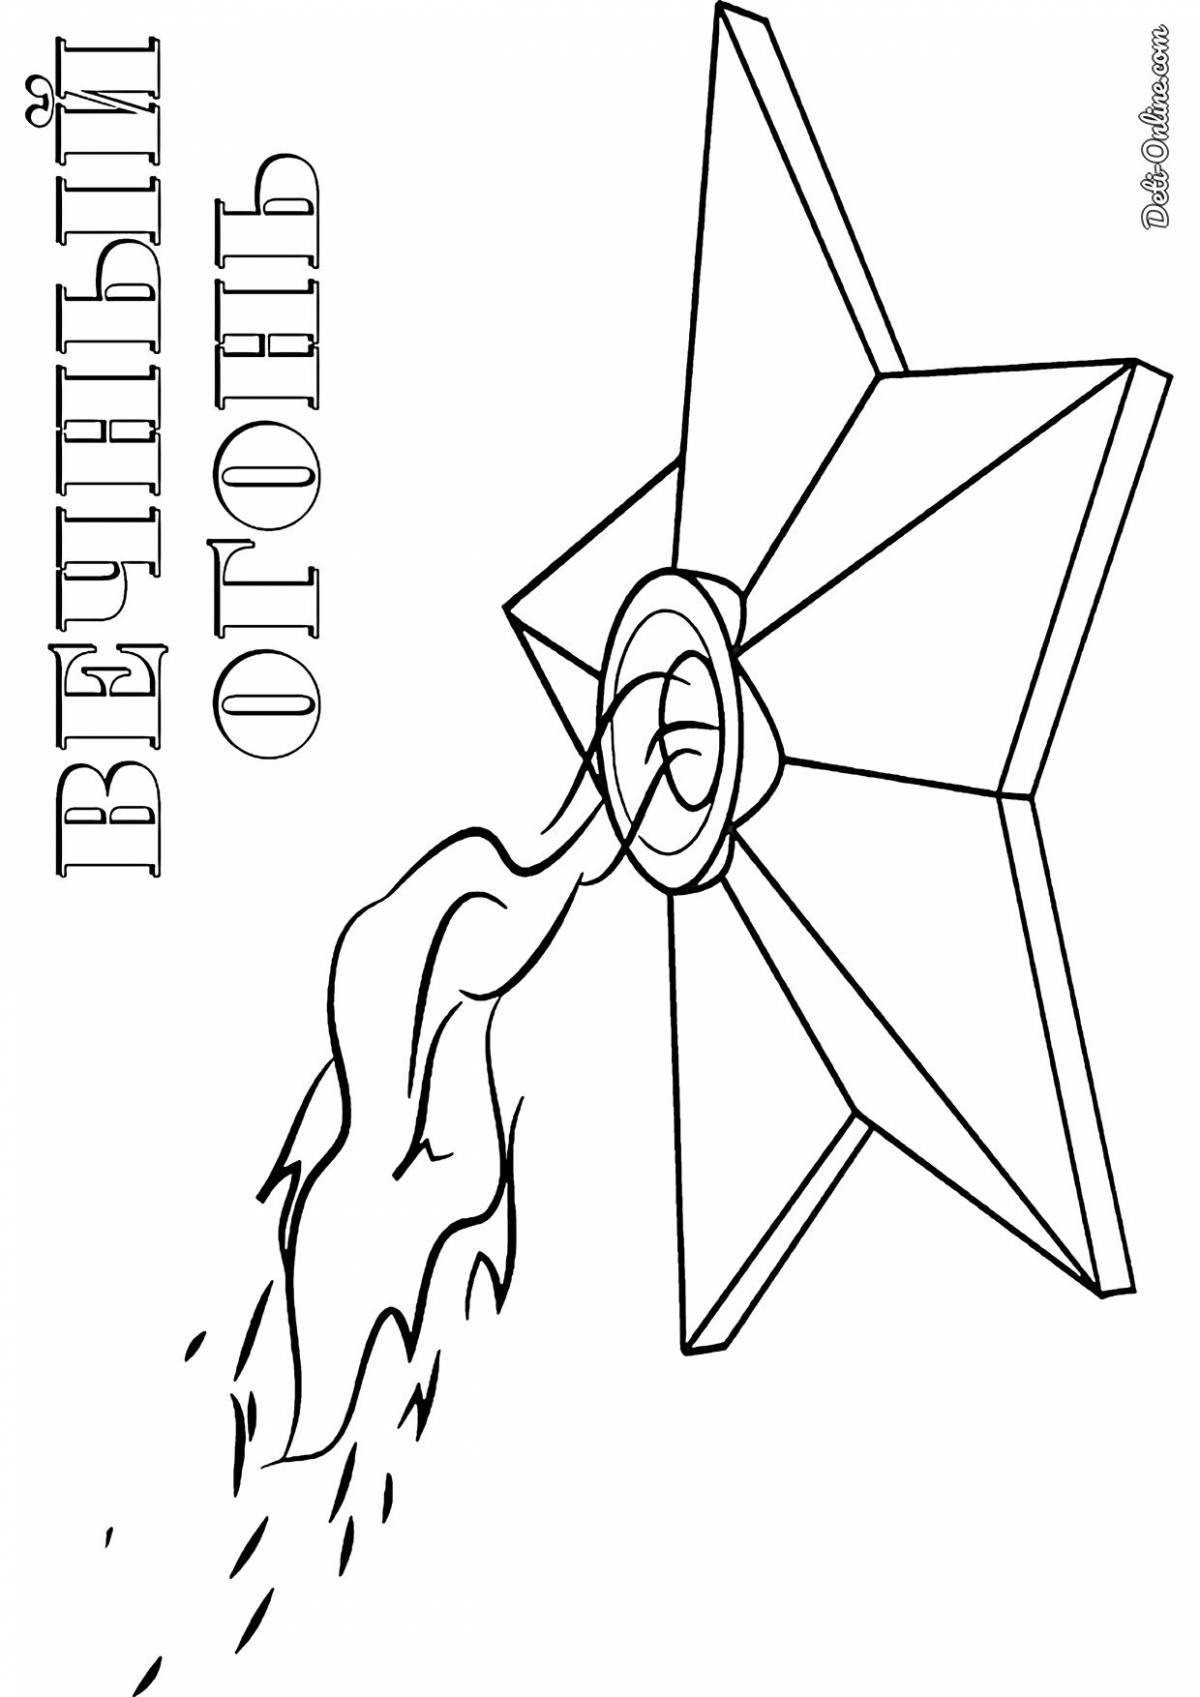 Brilliantly crafted May 9th eternal flame coloring page